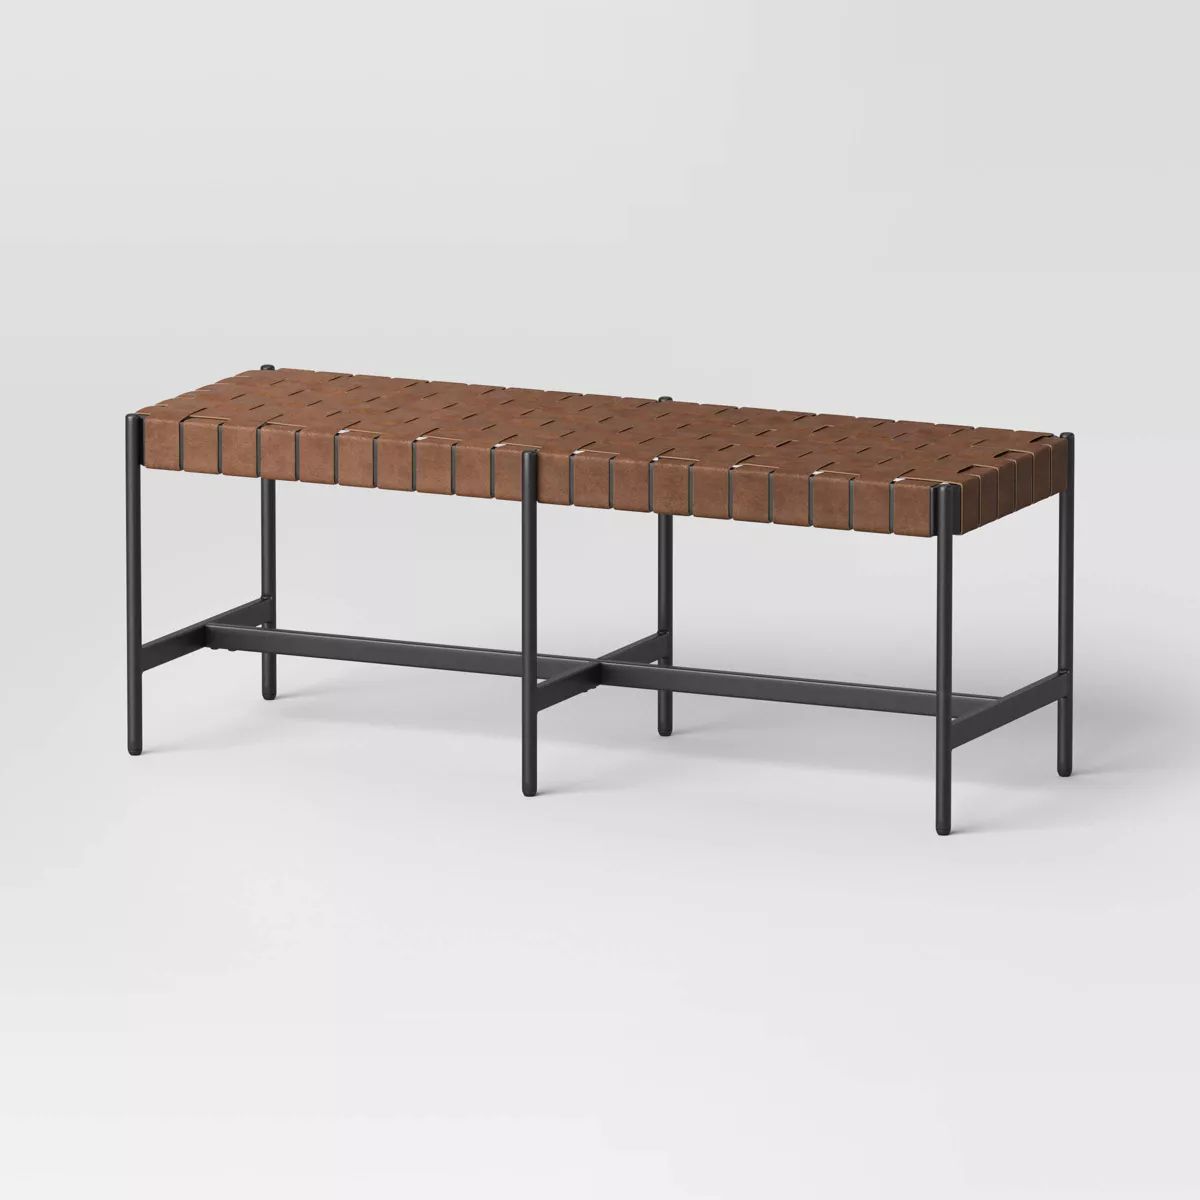 Woven Faux Leather with Metal Base Bench Brown - Threshold™ | Target